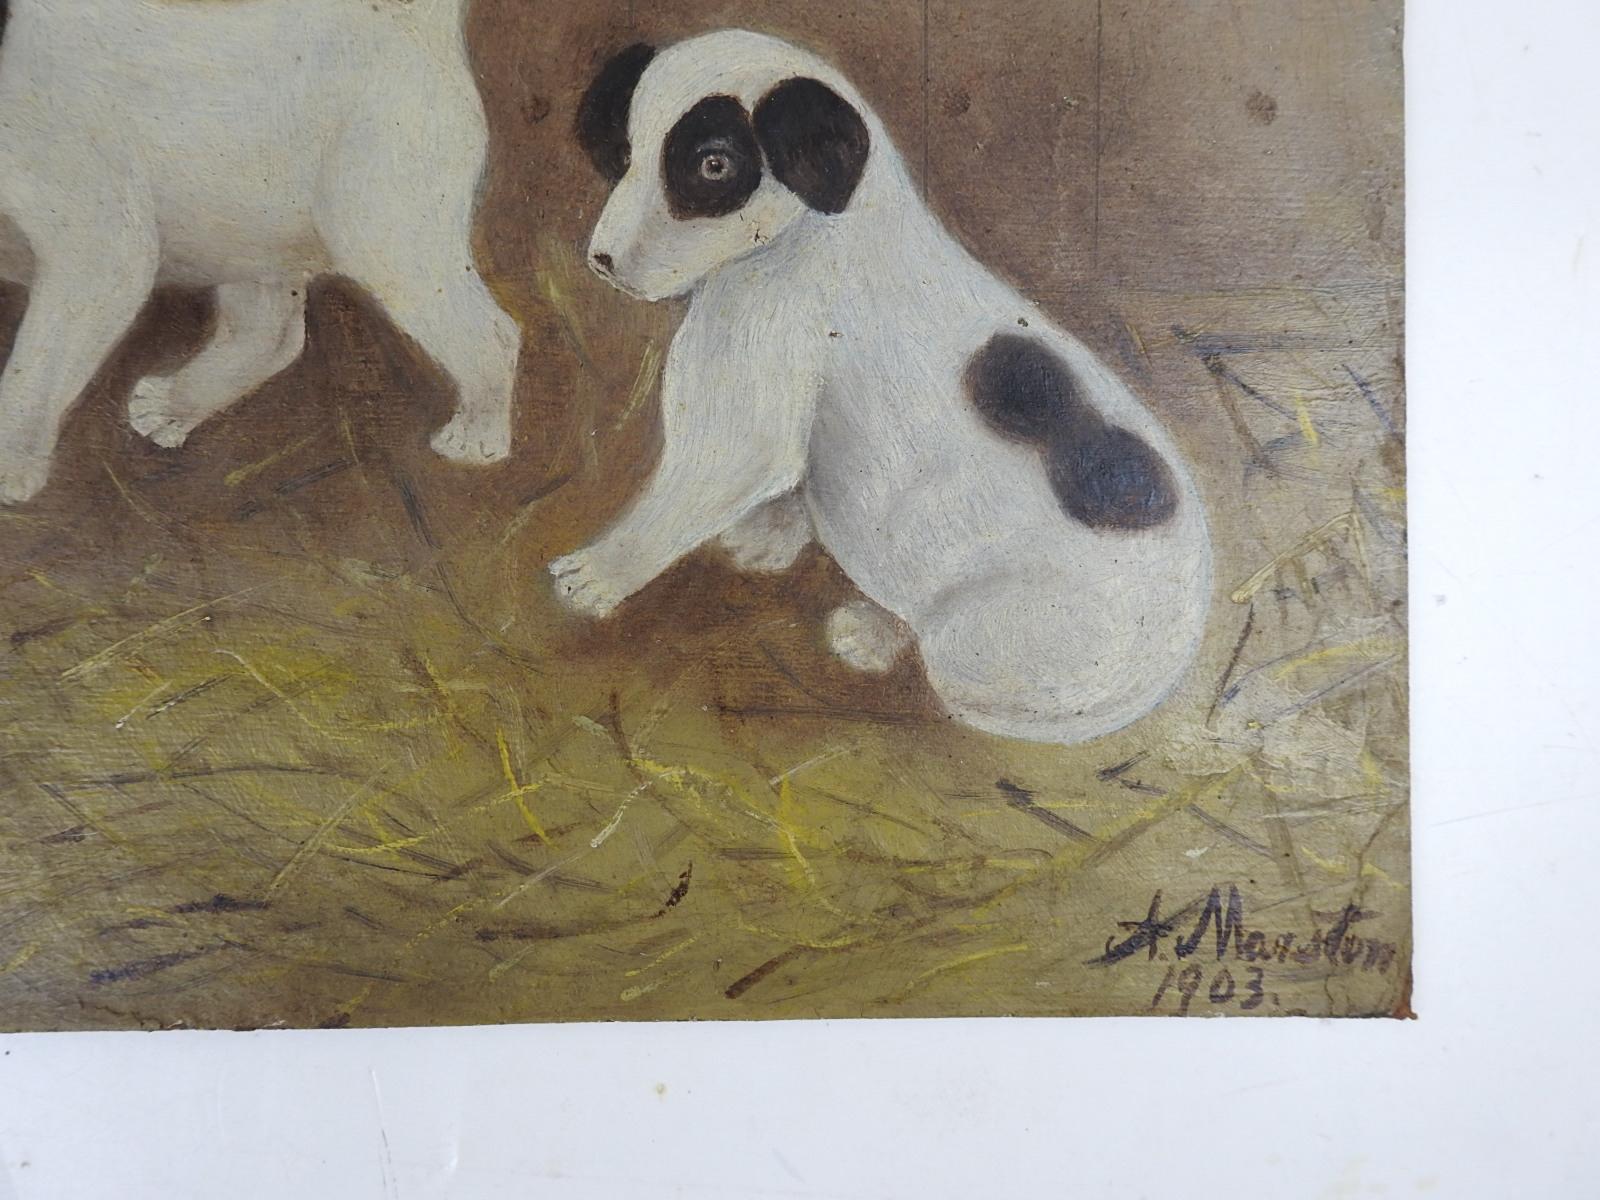 Antique 1903 oil on artist board folk art painting of a pair of puppies and a mouse.  They look like little Jack Russell terriers and are in a barn and the mouse hole is on the left.  Signed A. Marston and dated 1903 lower right corner.  Note on old